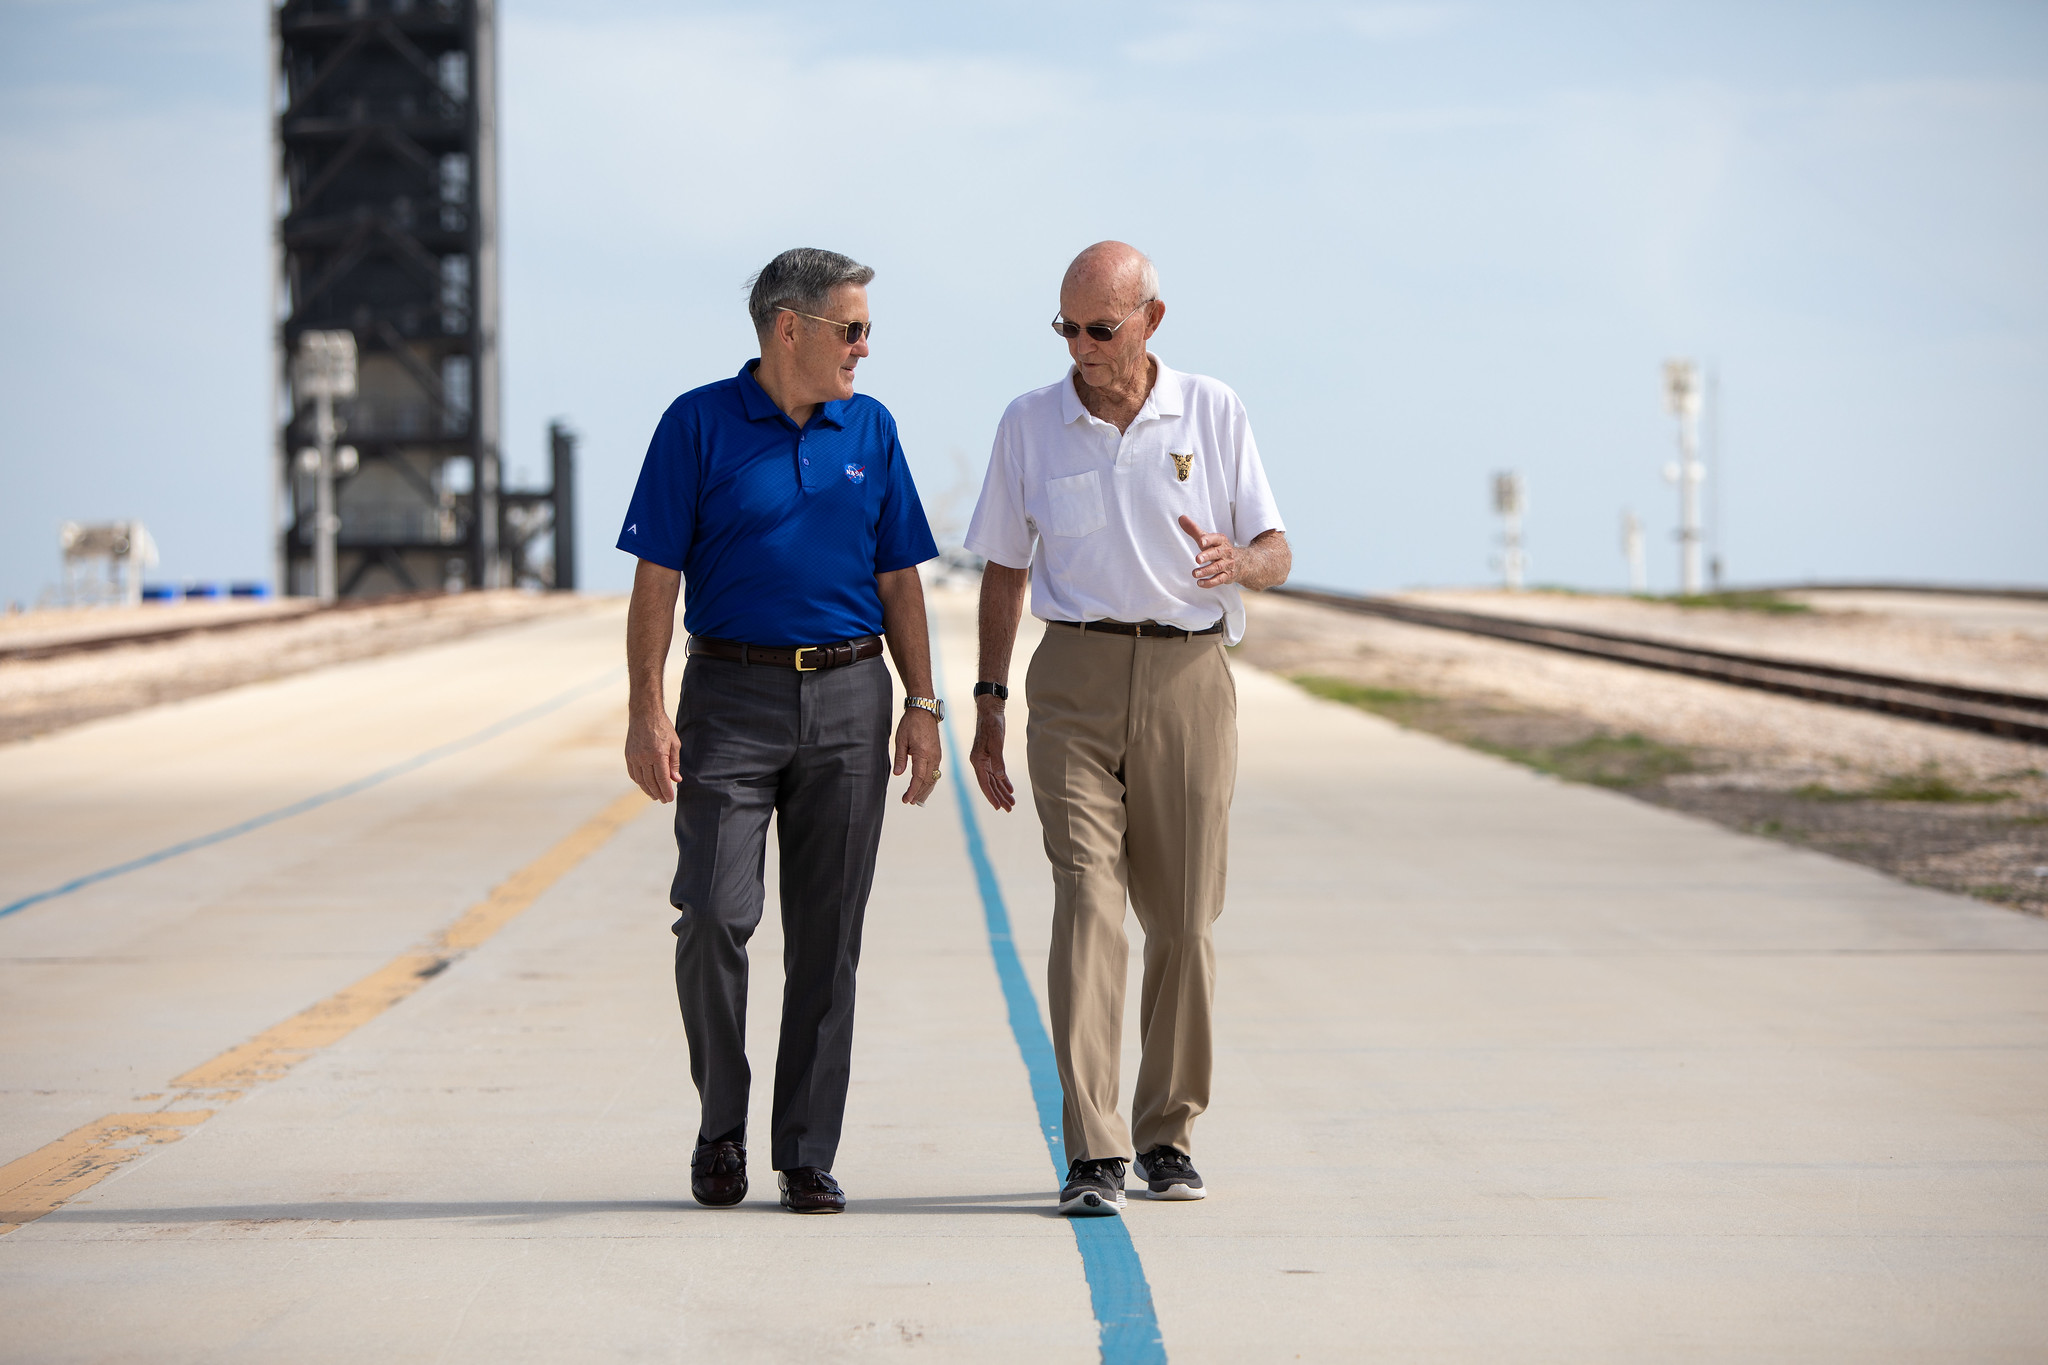 On July 16, 2019, astronaut Michael Collins, right, speaks to Kennedy Space Center Director Bob Cabana at Launch Complex 39A.